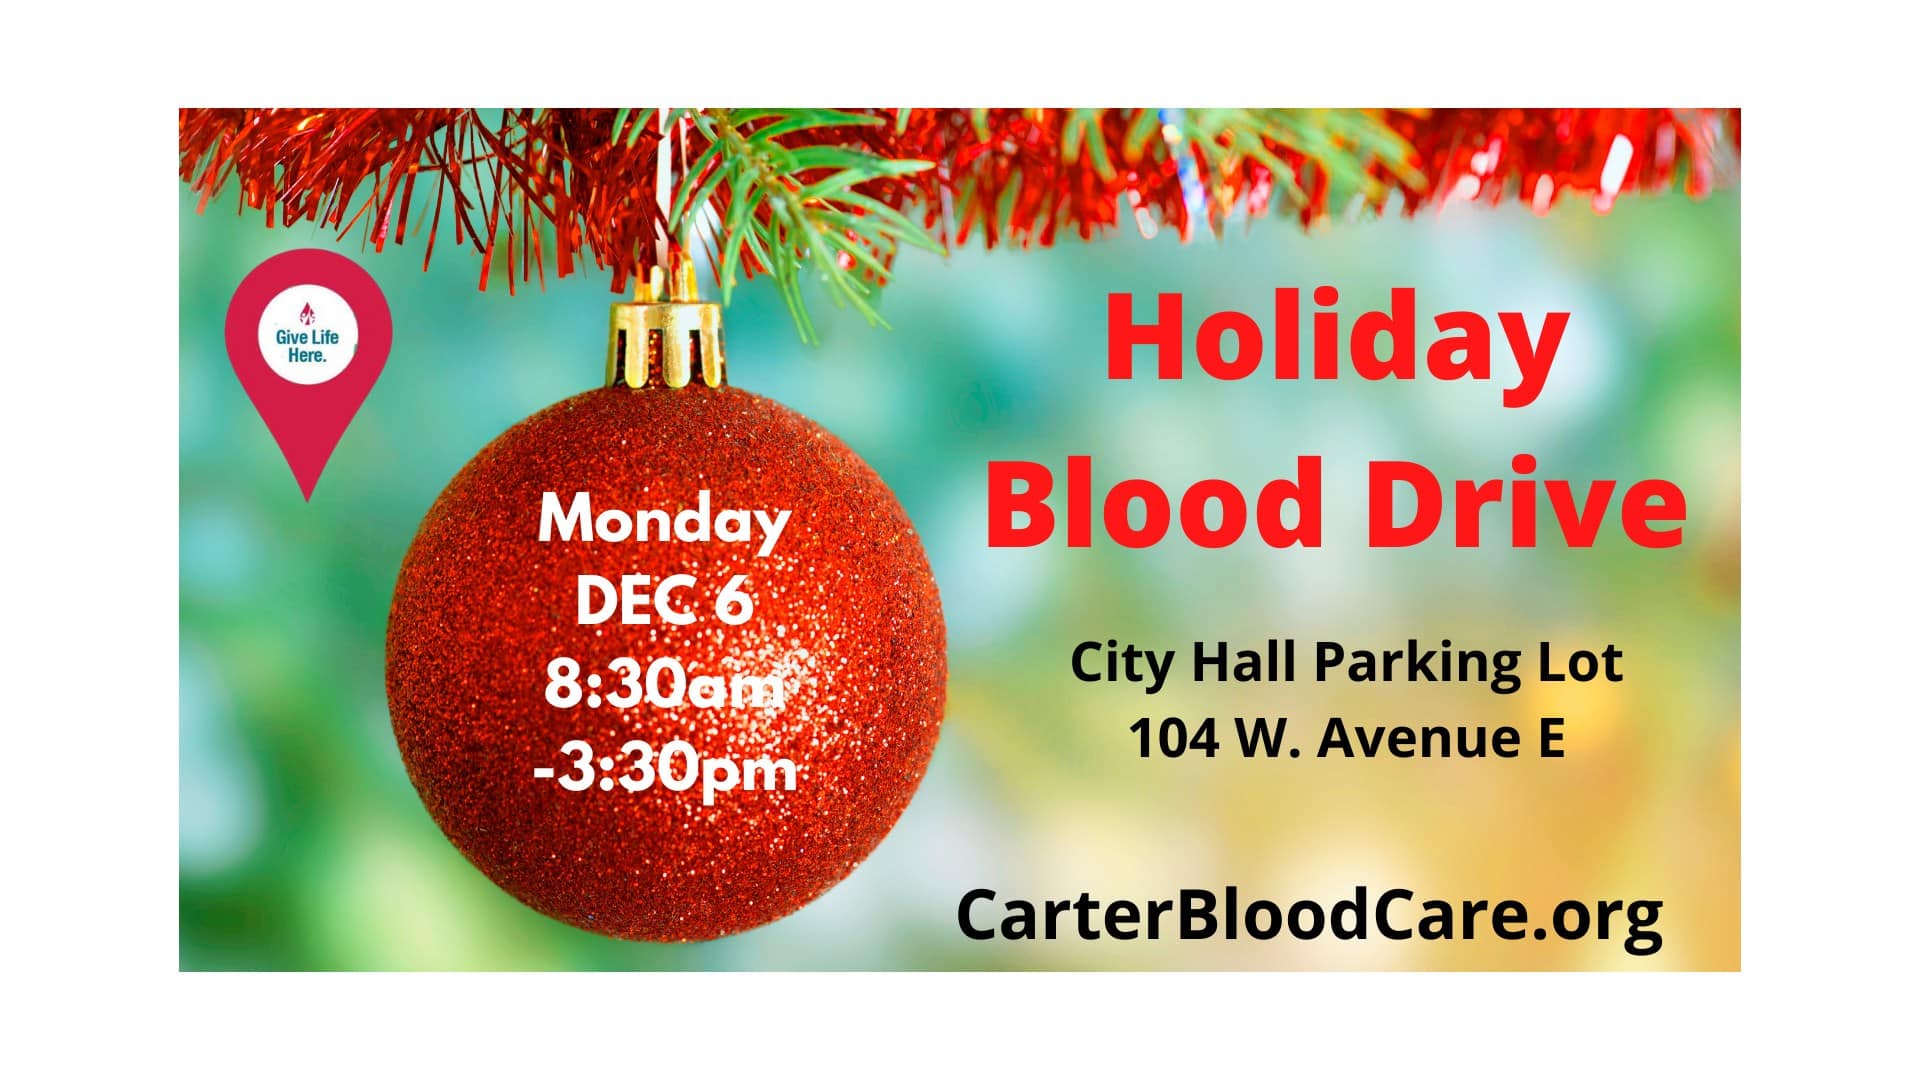 Holiday Blood Drive flyer